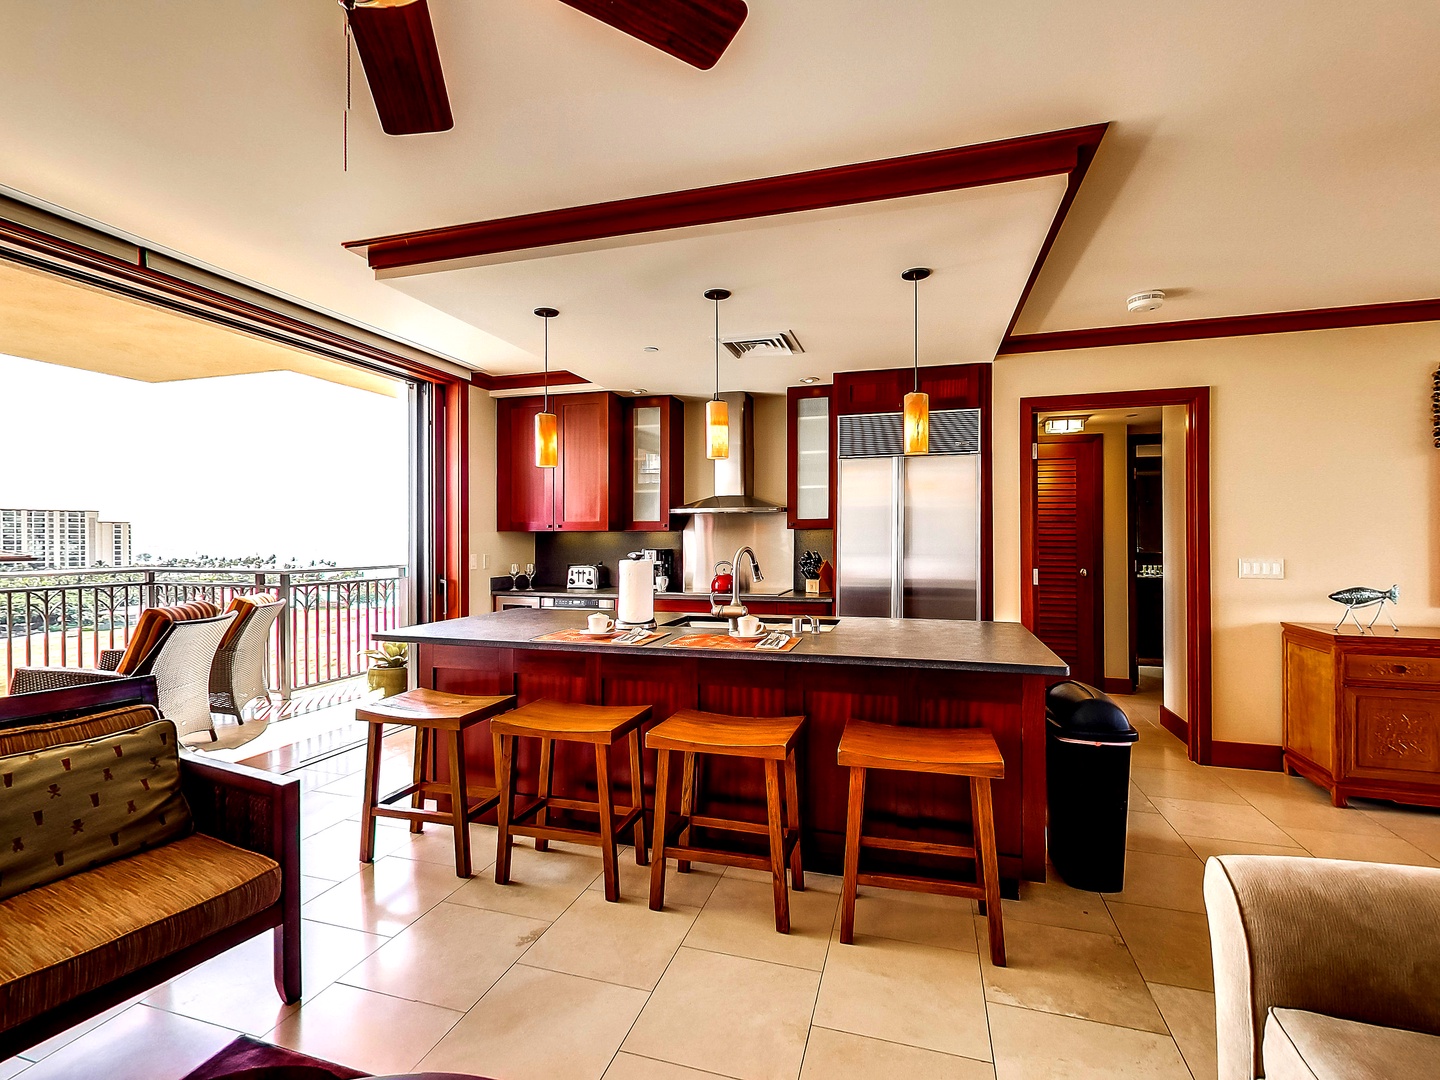 Kapolei Vacation Rentals, Ko Olina Beach Villas O1011 - The kitchen with bar seating and stainless steel appliances.